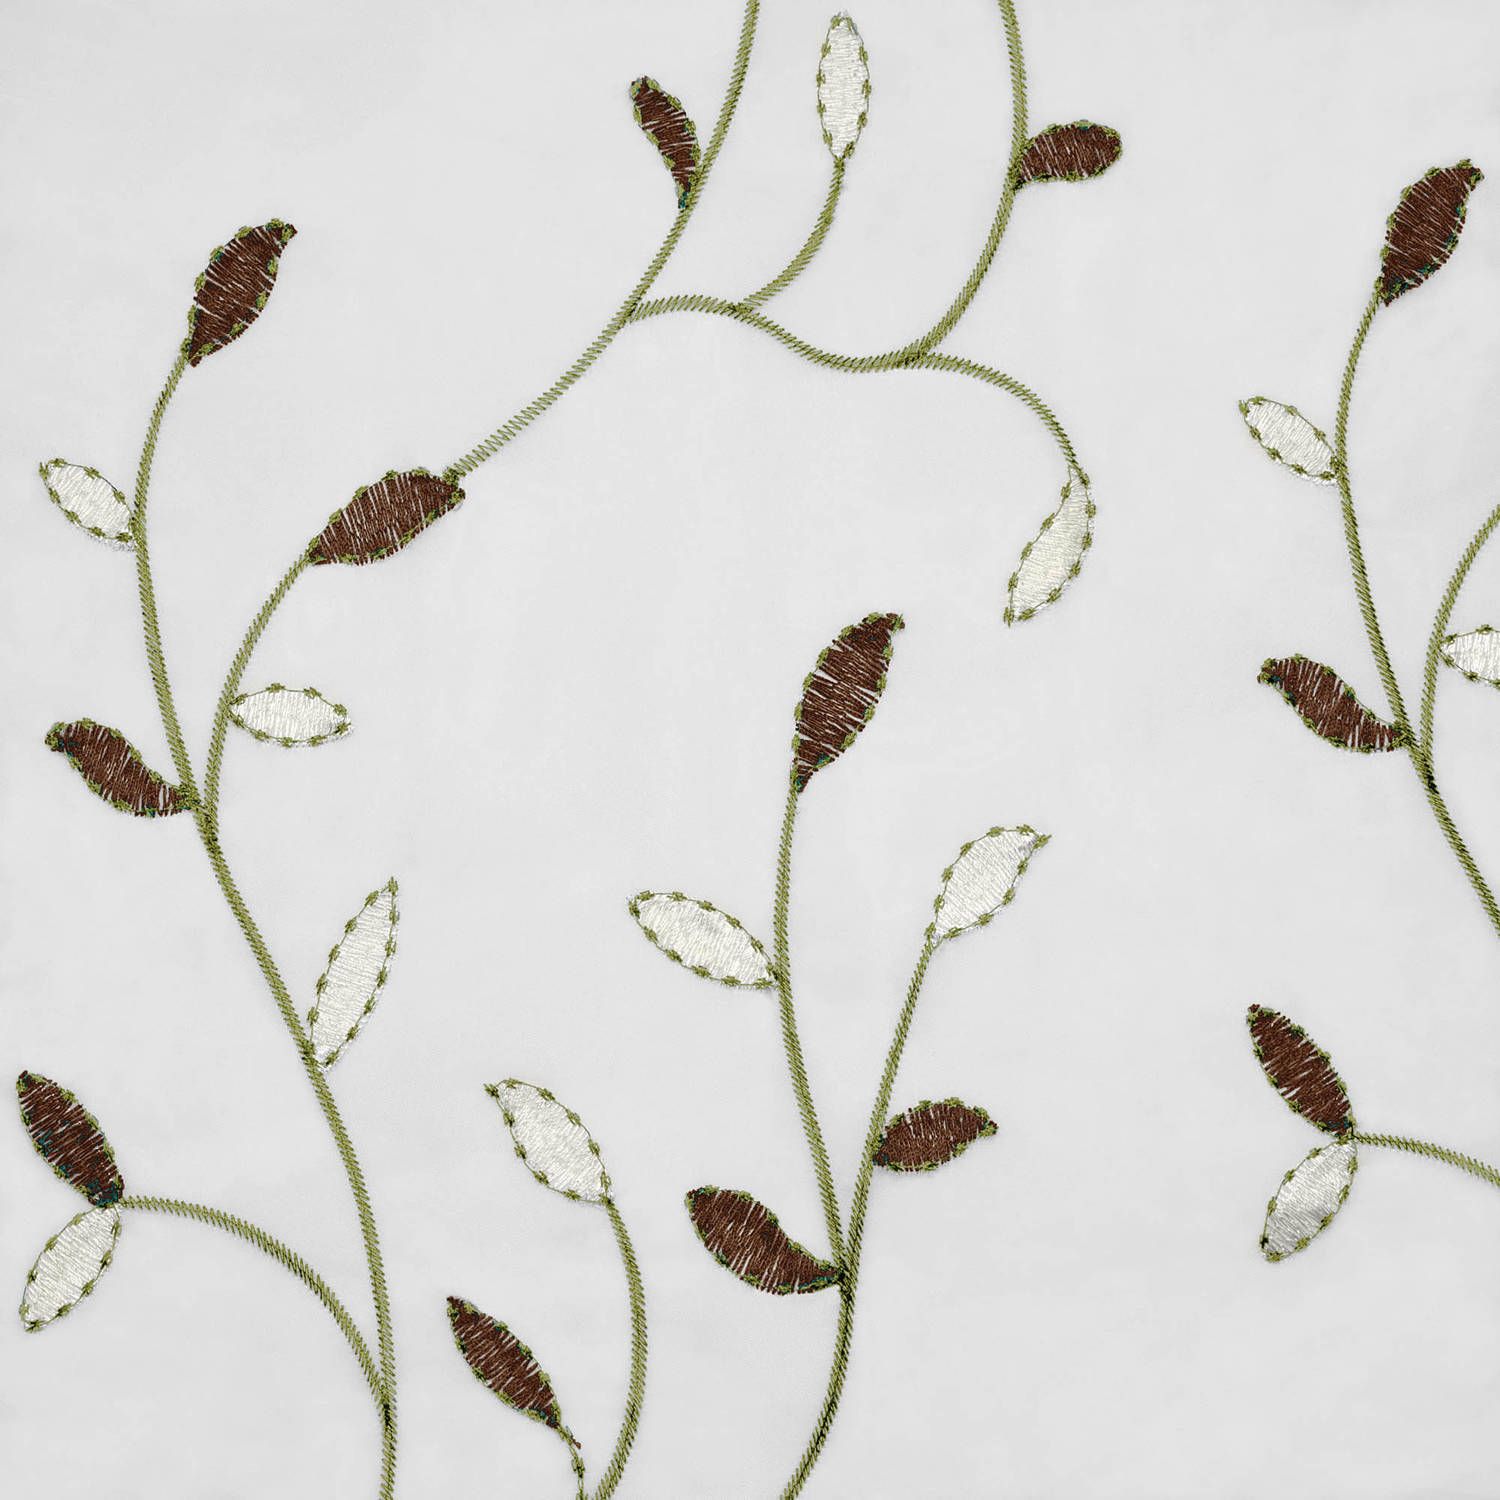 Wavy Leaves Embroidered Sheer Extra Wide 54" X 84" Grommet Curtain Panel Pertaining To Wavy Leaves Embroidered Sheer Extra Wide Grommet Curtain Panels (View 11 of 30)